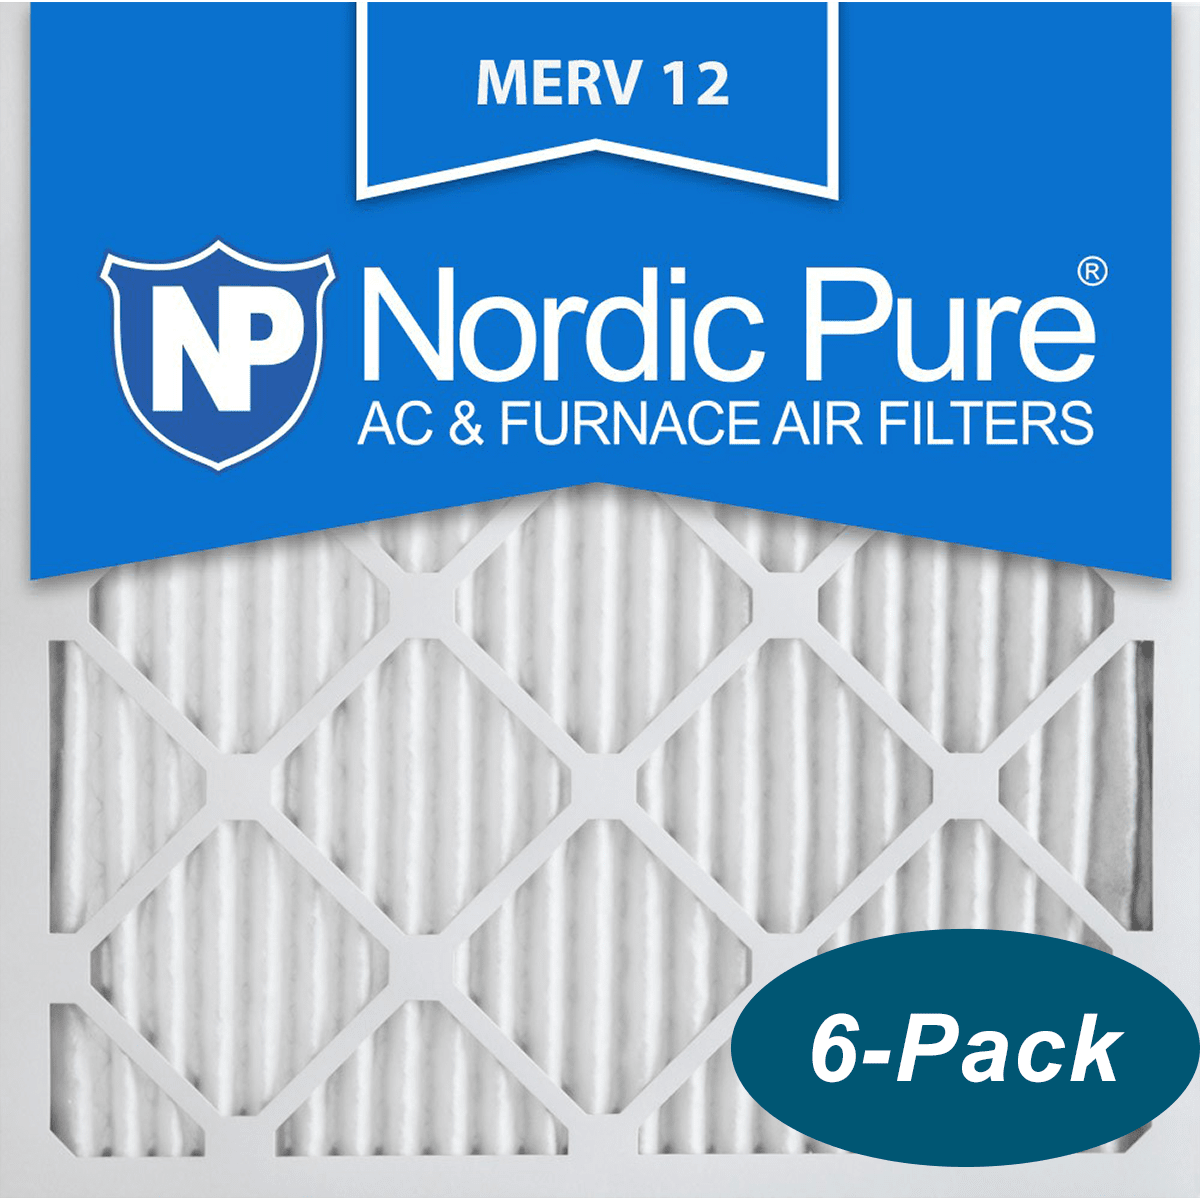 2 PACK 2 Piece Nordic Pure 16x20x1 Pure Carbon Pleated Odor Reduction AC Furnace Air Filters 